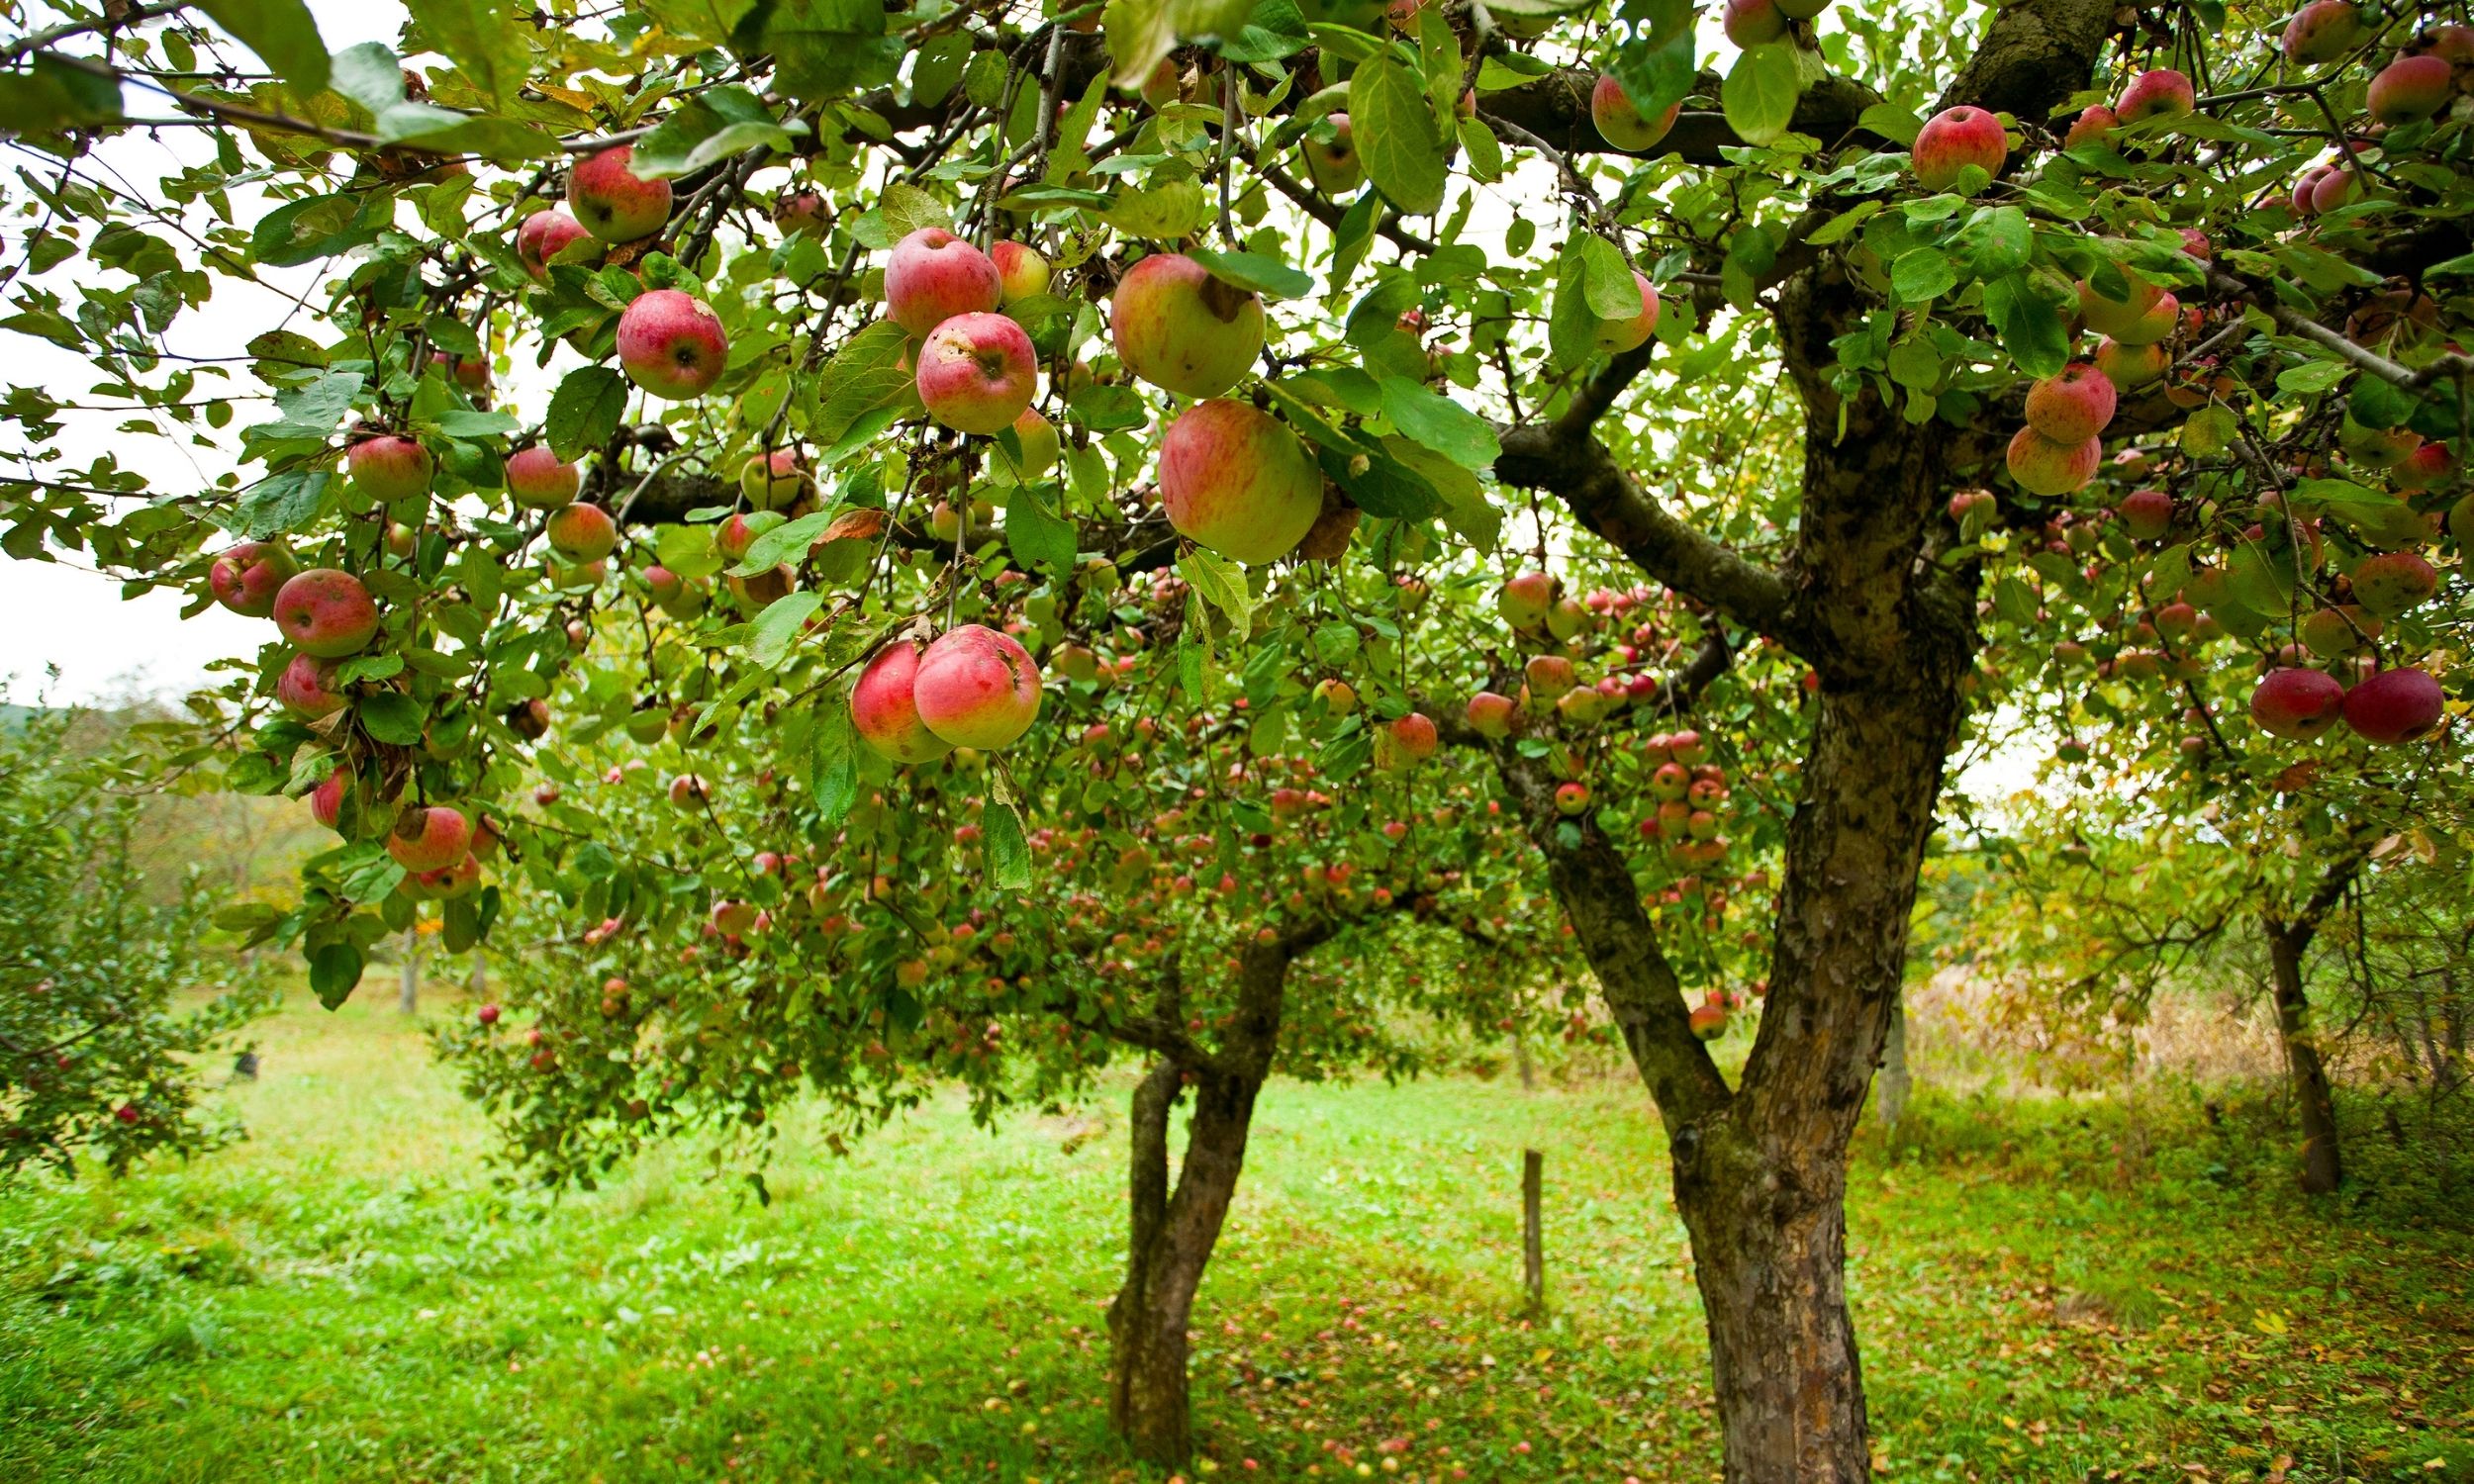 caring for apple trees-